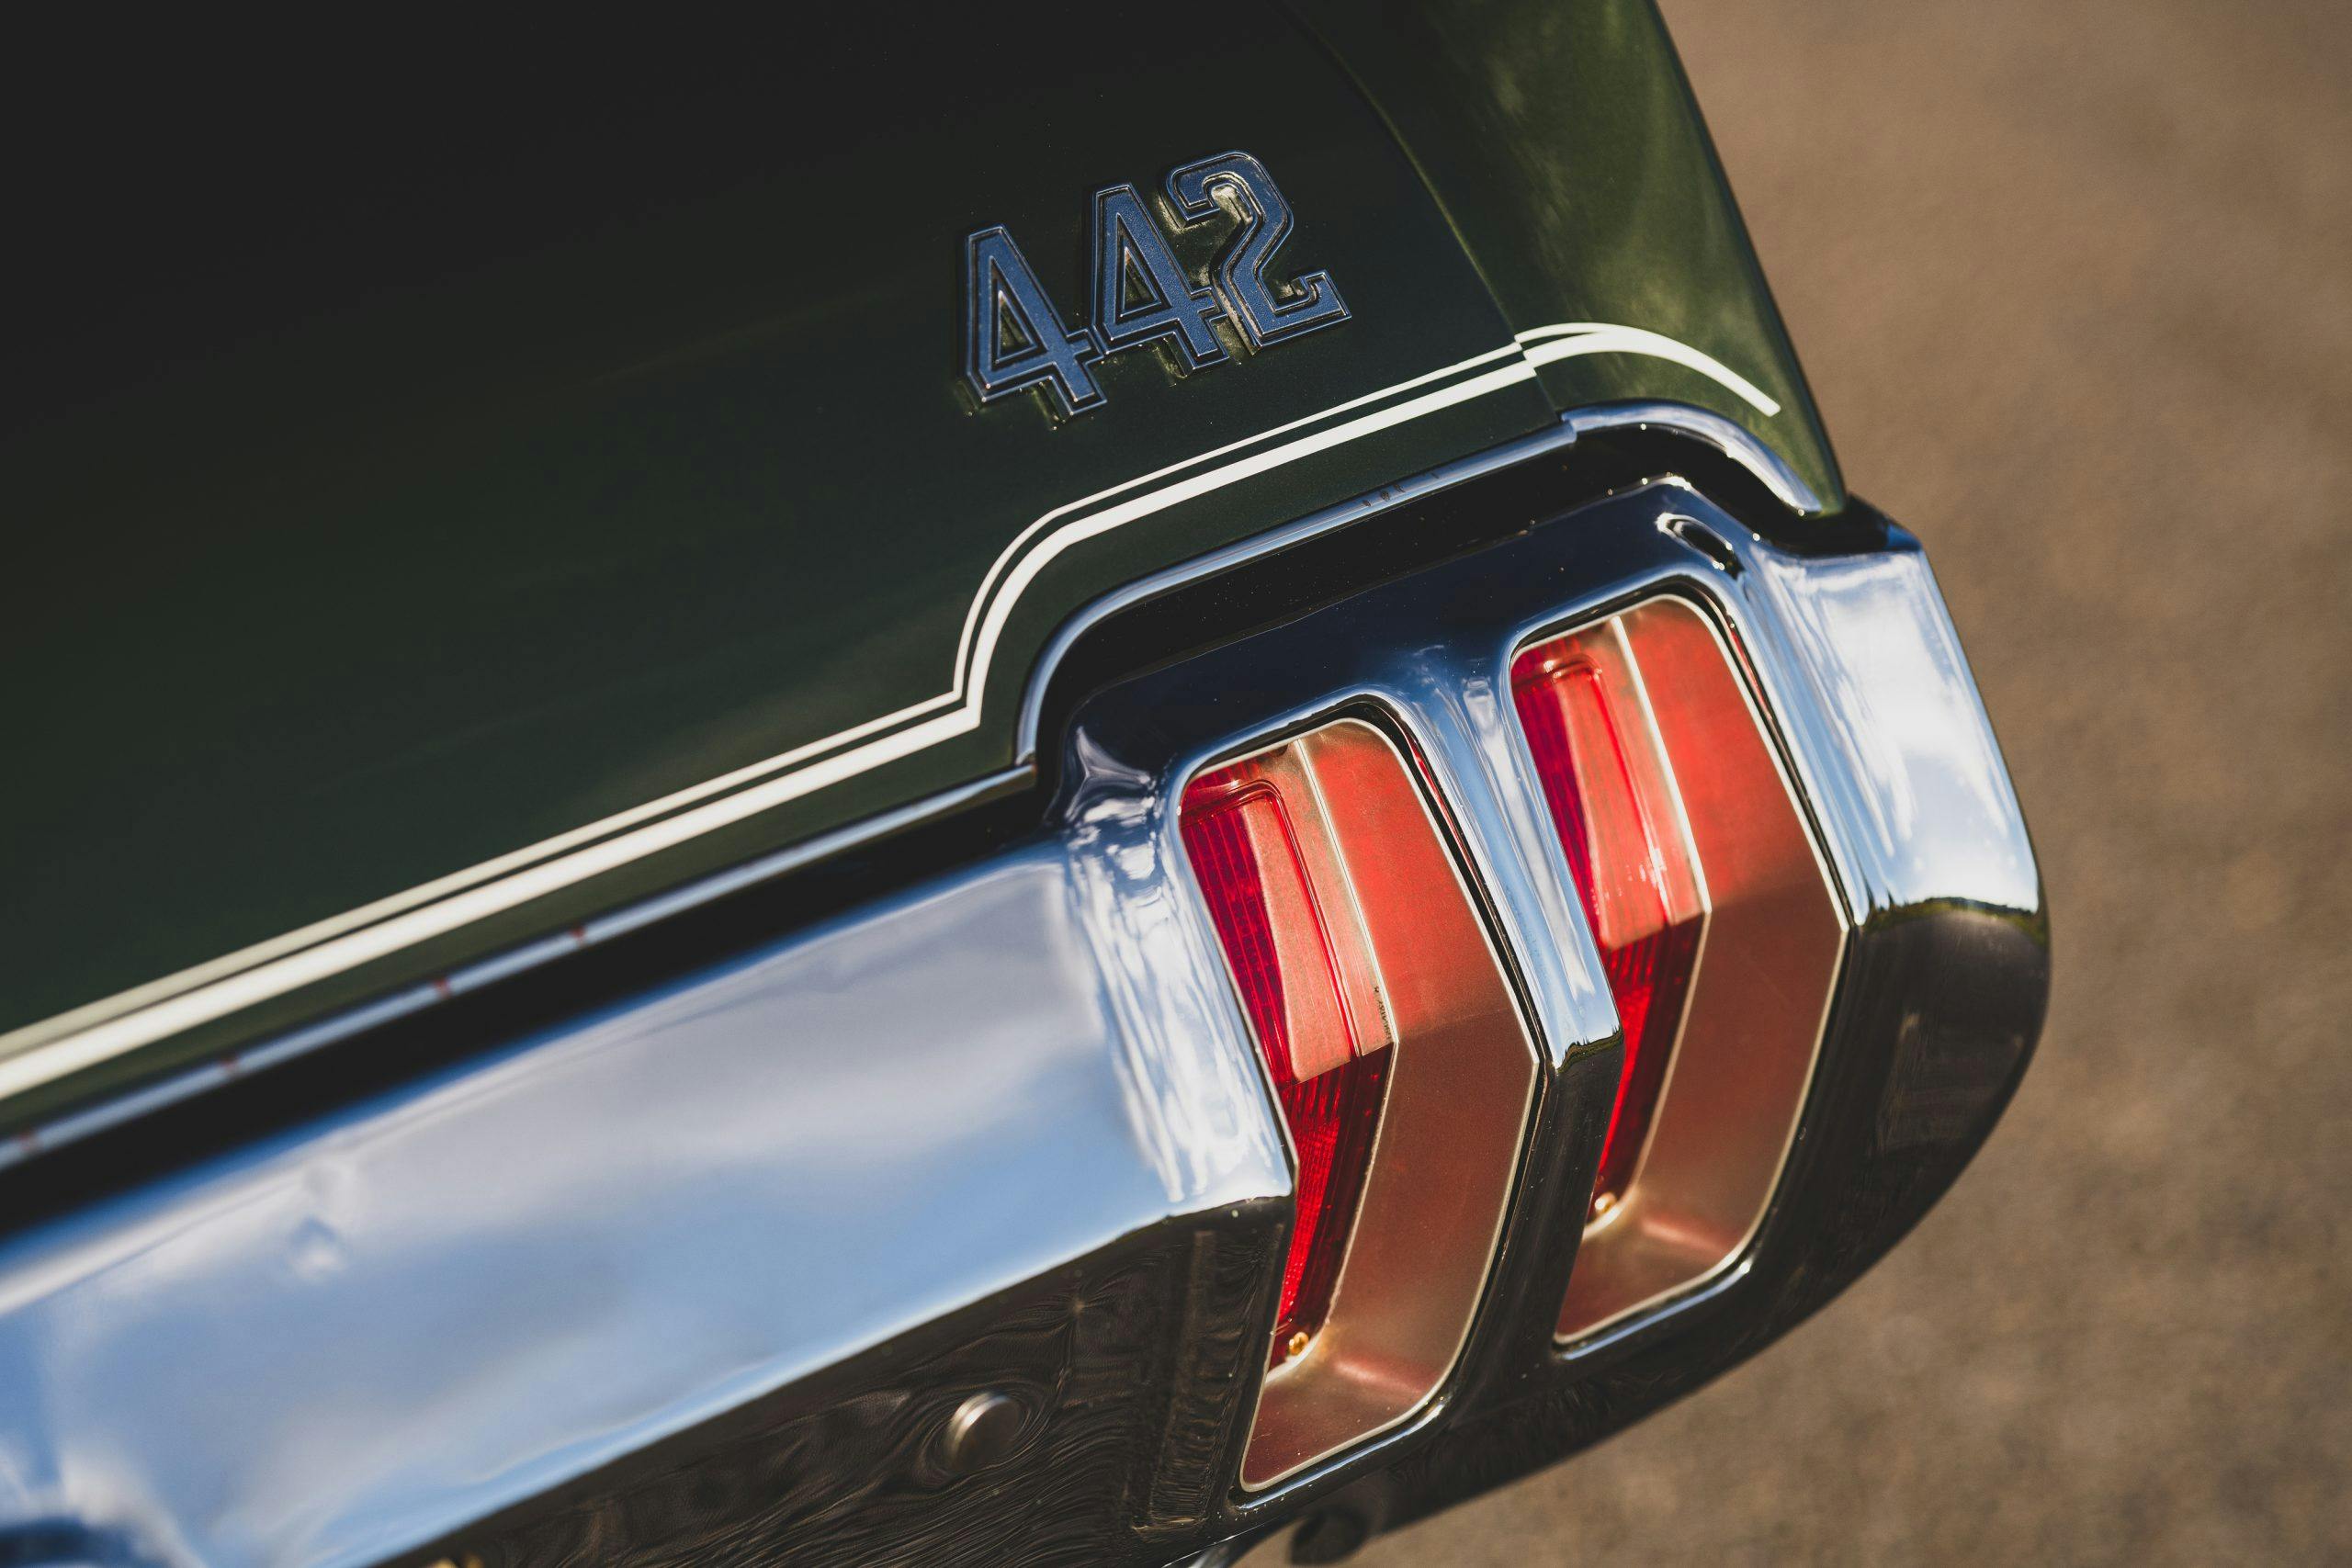 1970 Oldsmobile 442 Convertible Taillight and Badge